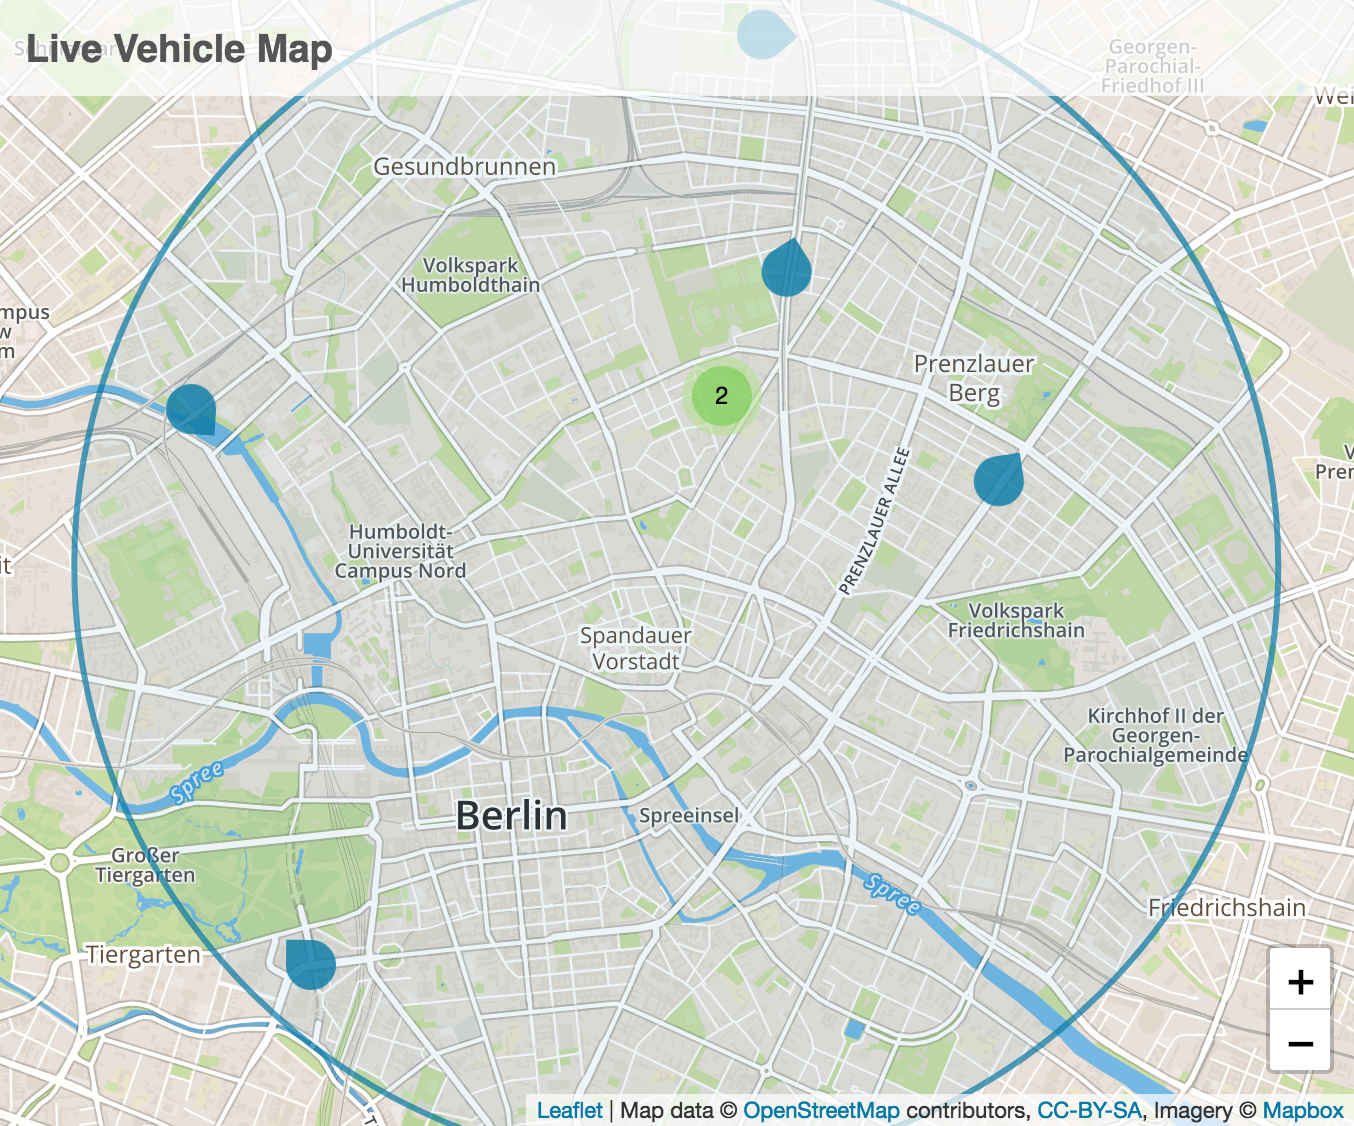 Vehicle position data visualized on a map